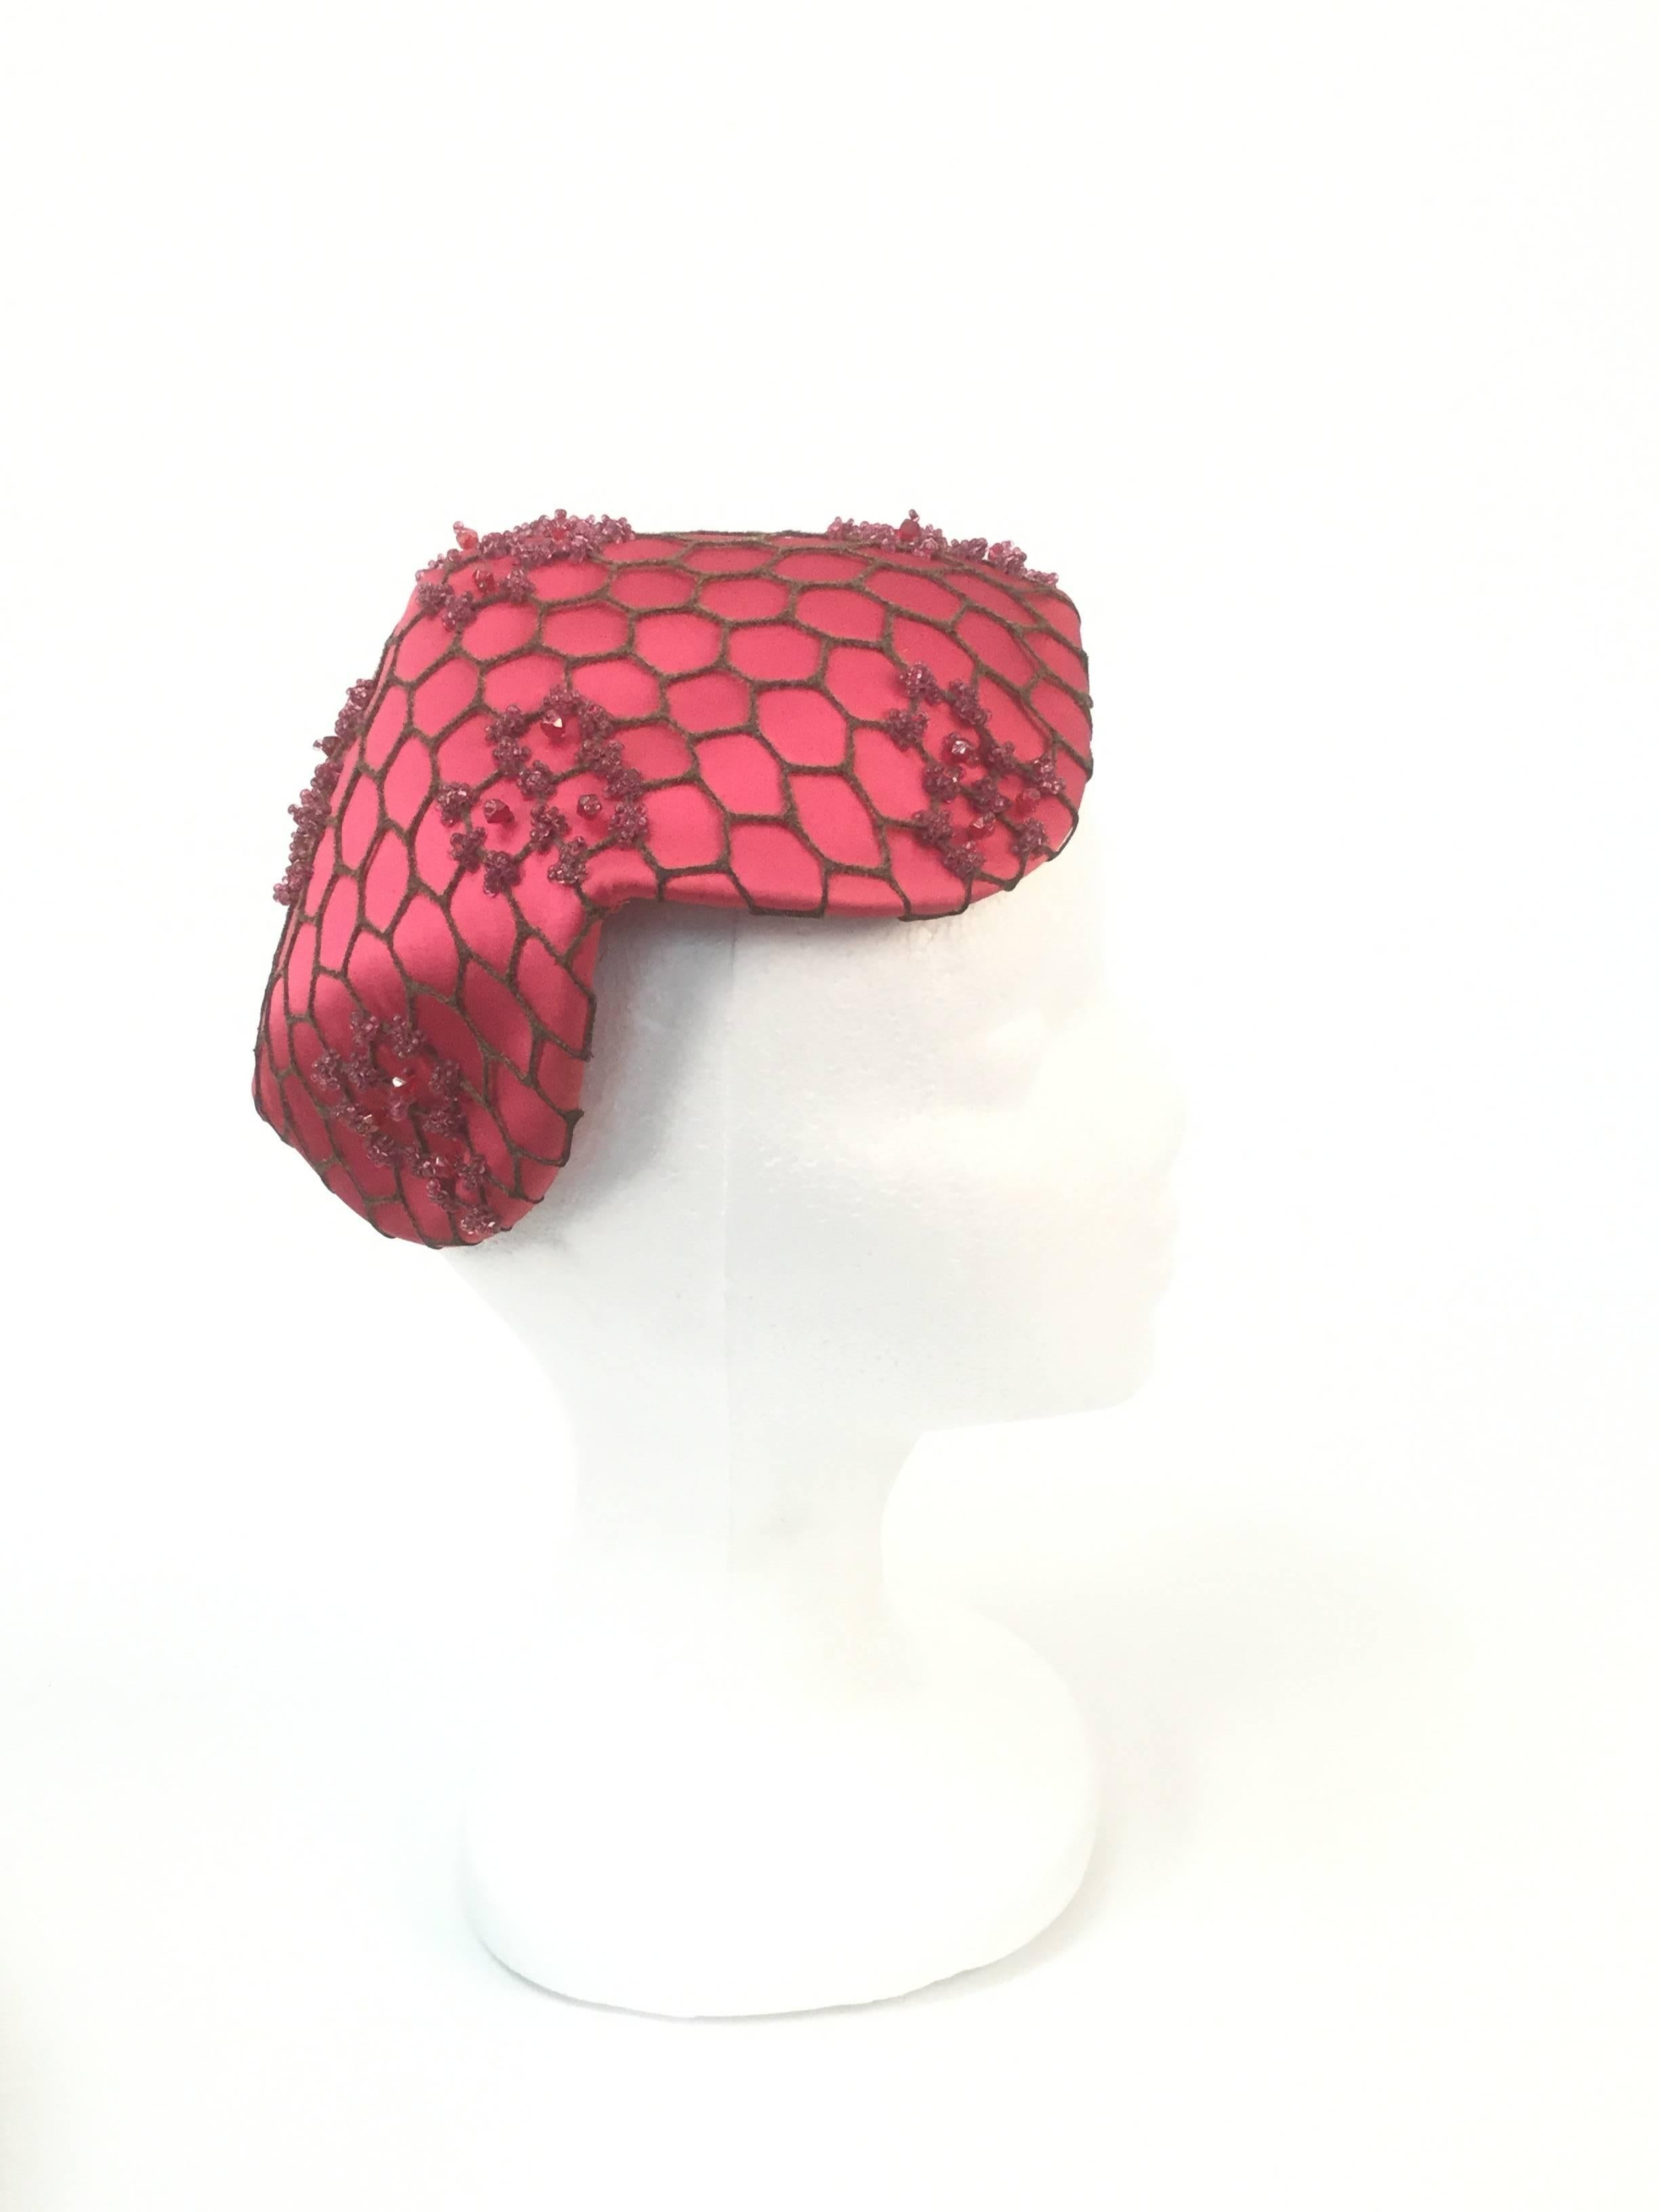 
Gorgeous bright pink hat by John Fredrics! John Frederics, in his later years known as Mr. John created pure couture with this lux piece of work.

Honeycomb beauty is composed of pink satin, arranged in a pyramid-like shape, with curved,